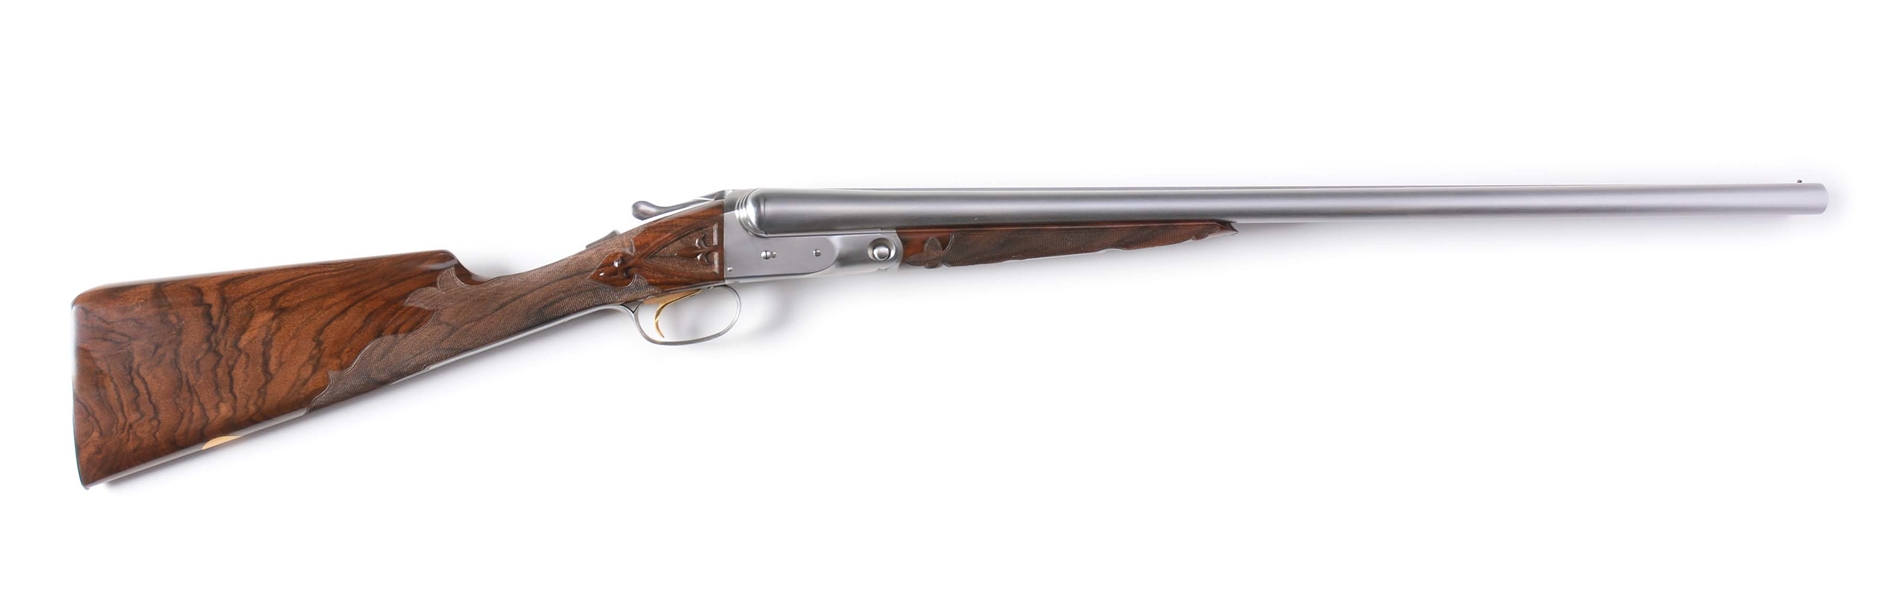 (M) PARKER REPRODUCTION A1 SPECIAL 12 GAUGE SHOTGUN WITH EXTRA BARRELS IN THE WHITE AND ORIGINAL BOXES